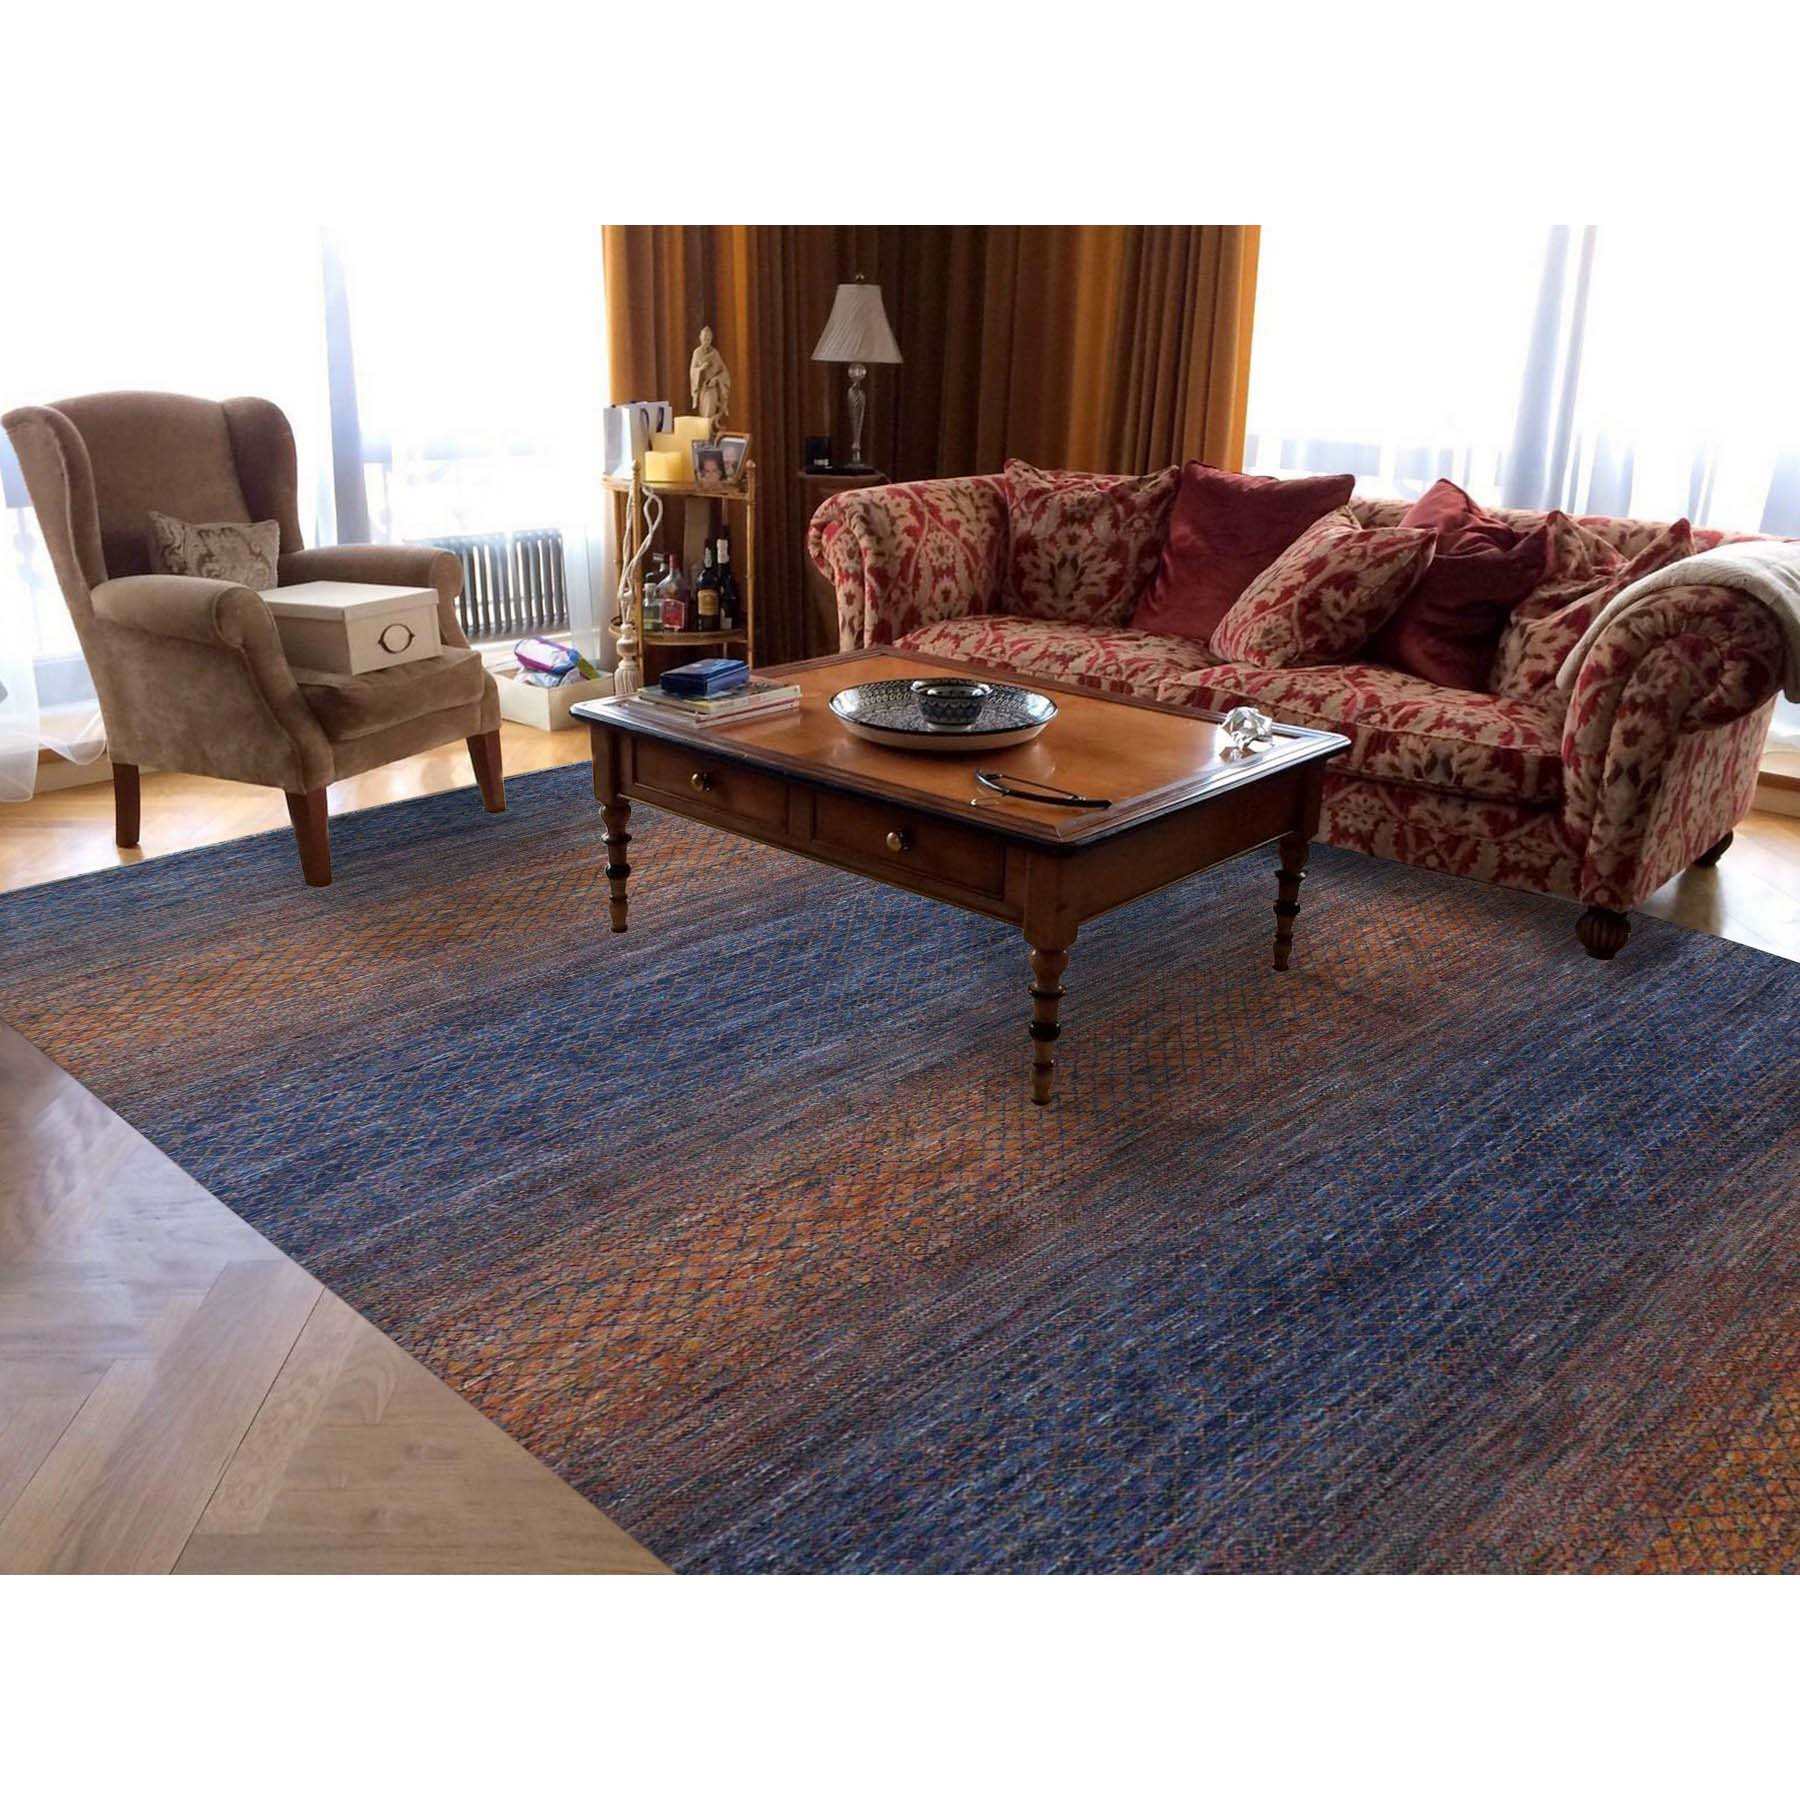 Modern-and-Contemporary-Hand-Knotted-Rug-395855